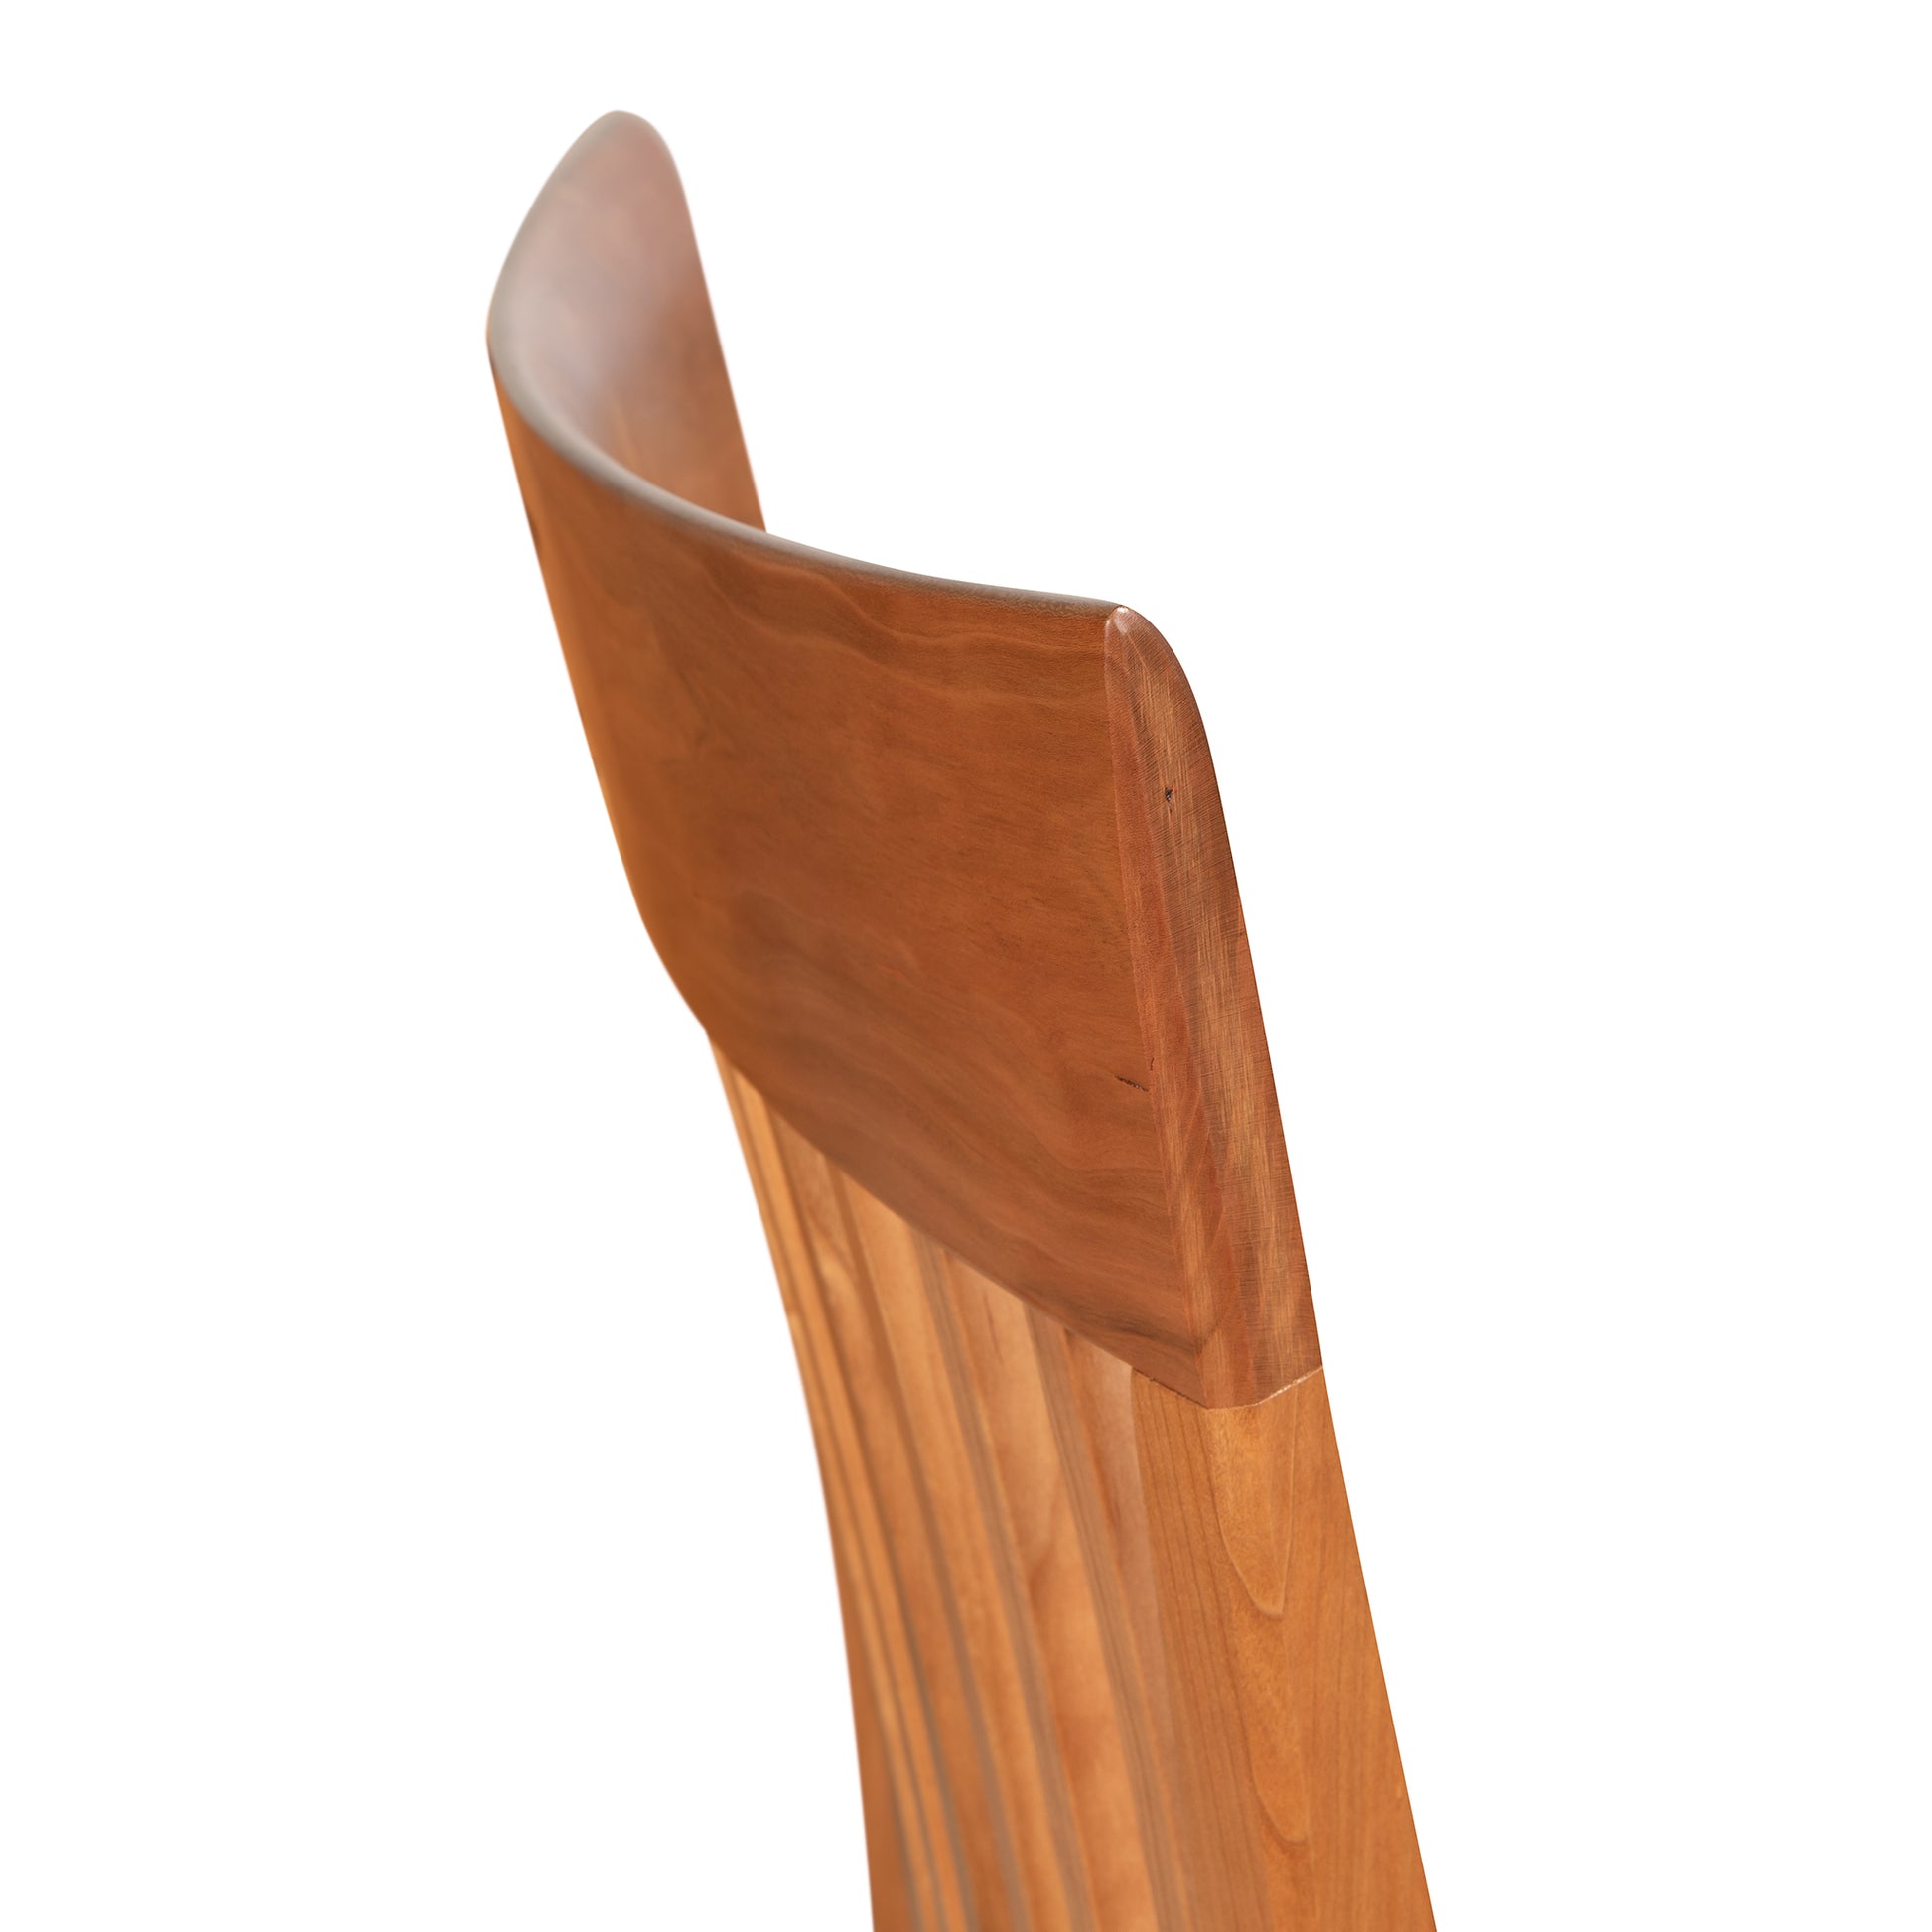 Detail of a Vermont Woods Studios Contemporary Shaker Side Chair backrest with a curved design, isolated against a white background.